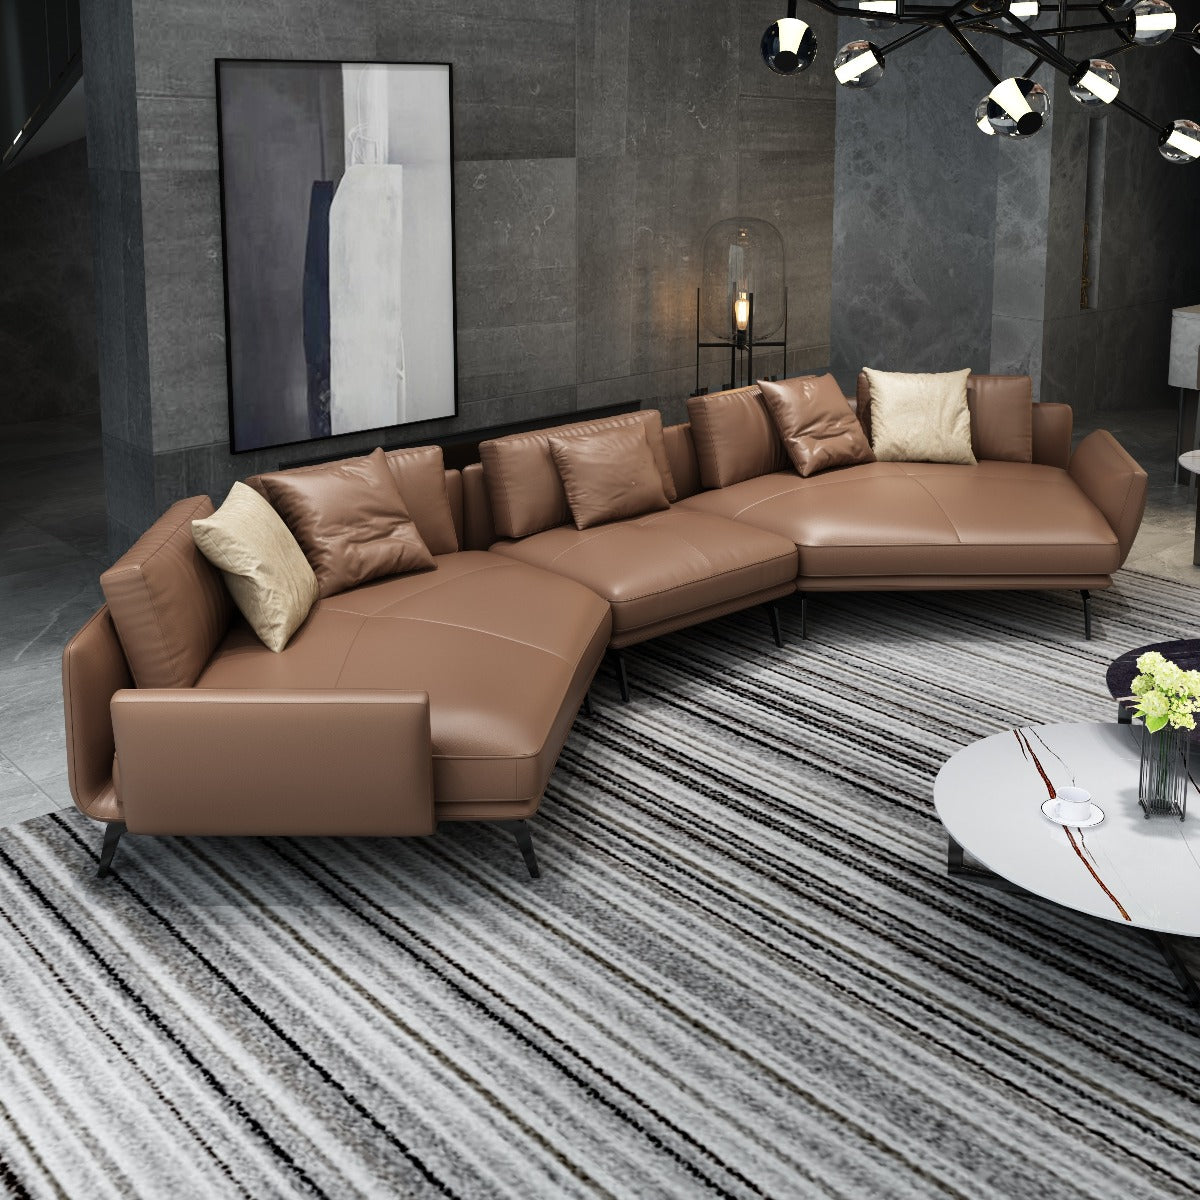 European Furniture - Venere 5 Seater Sectional in Russet Brown - 65550-5S - New Star Living